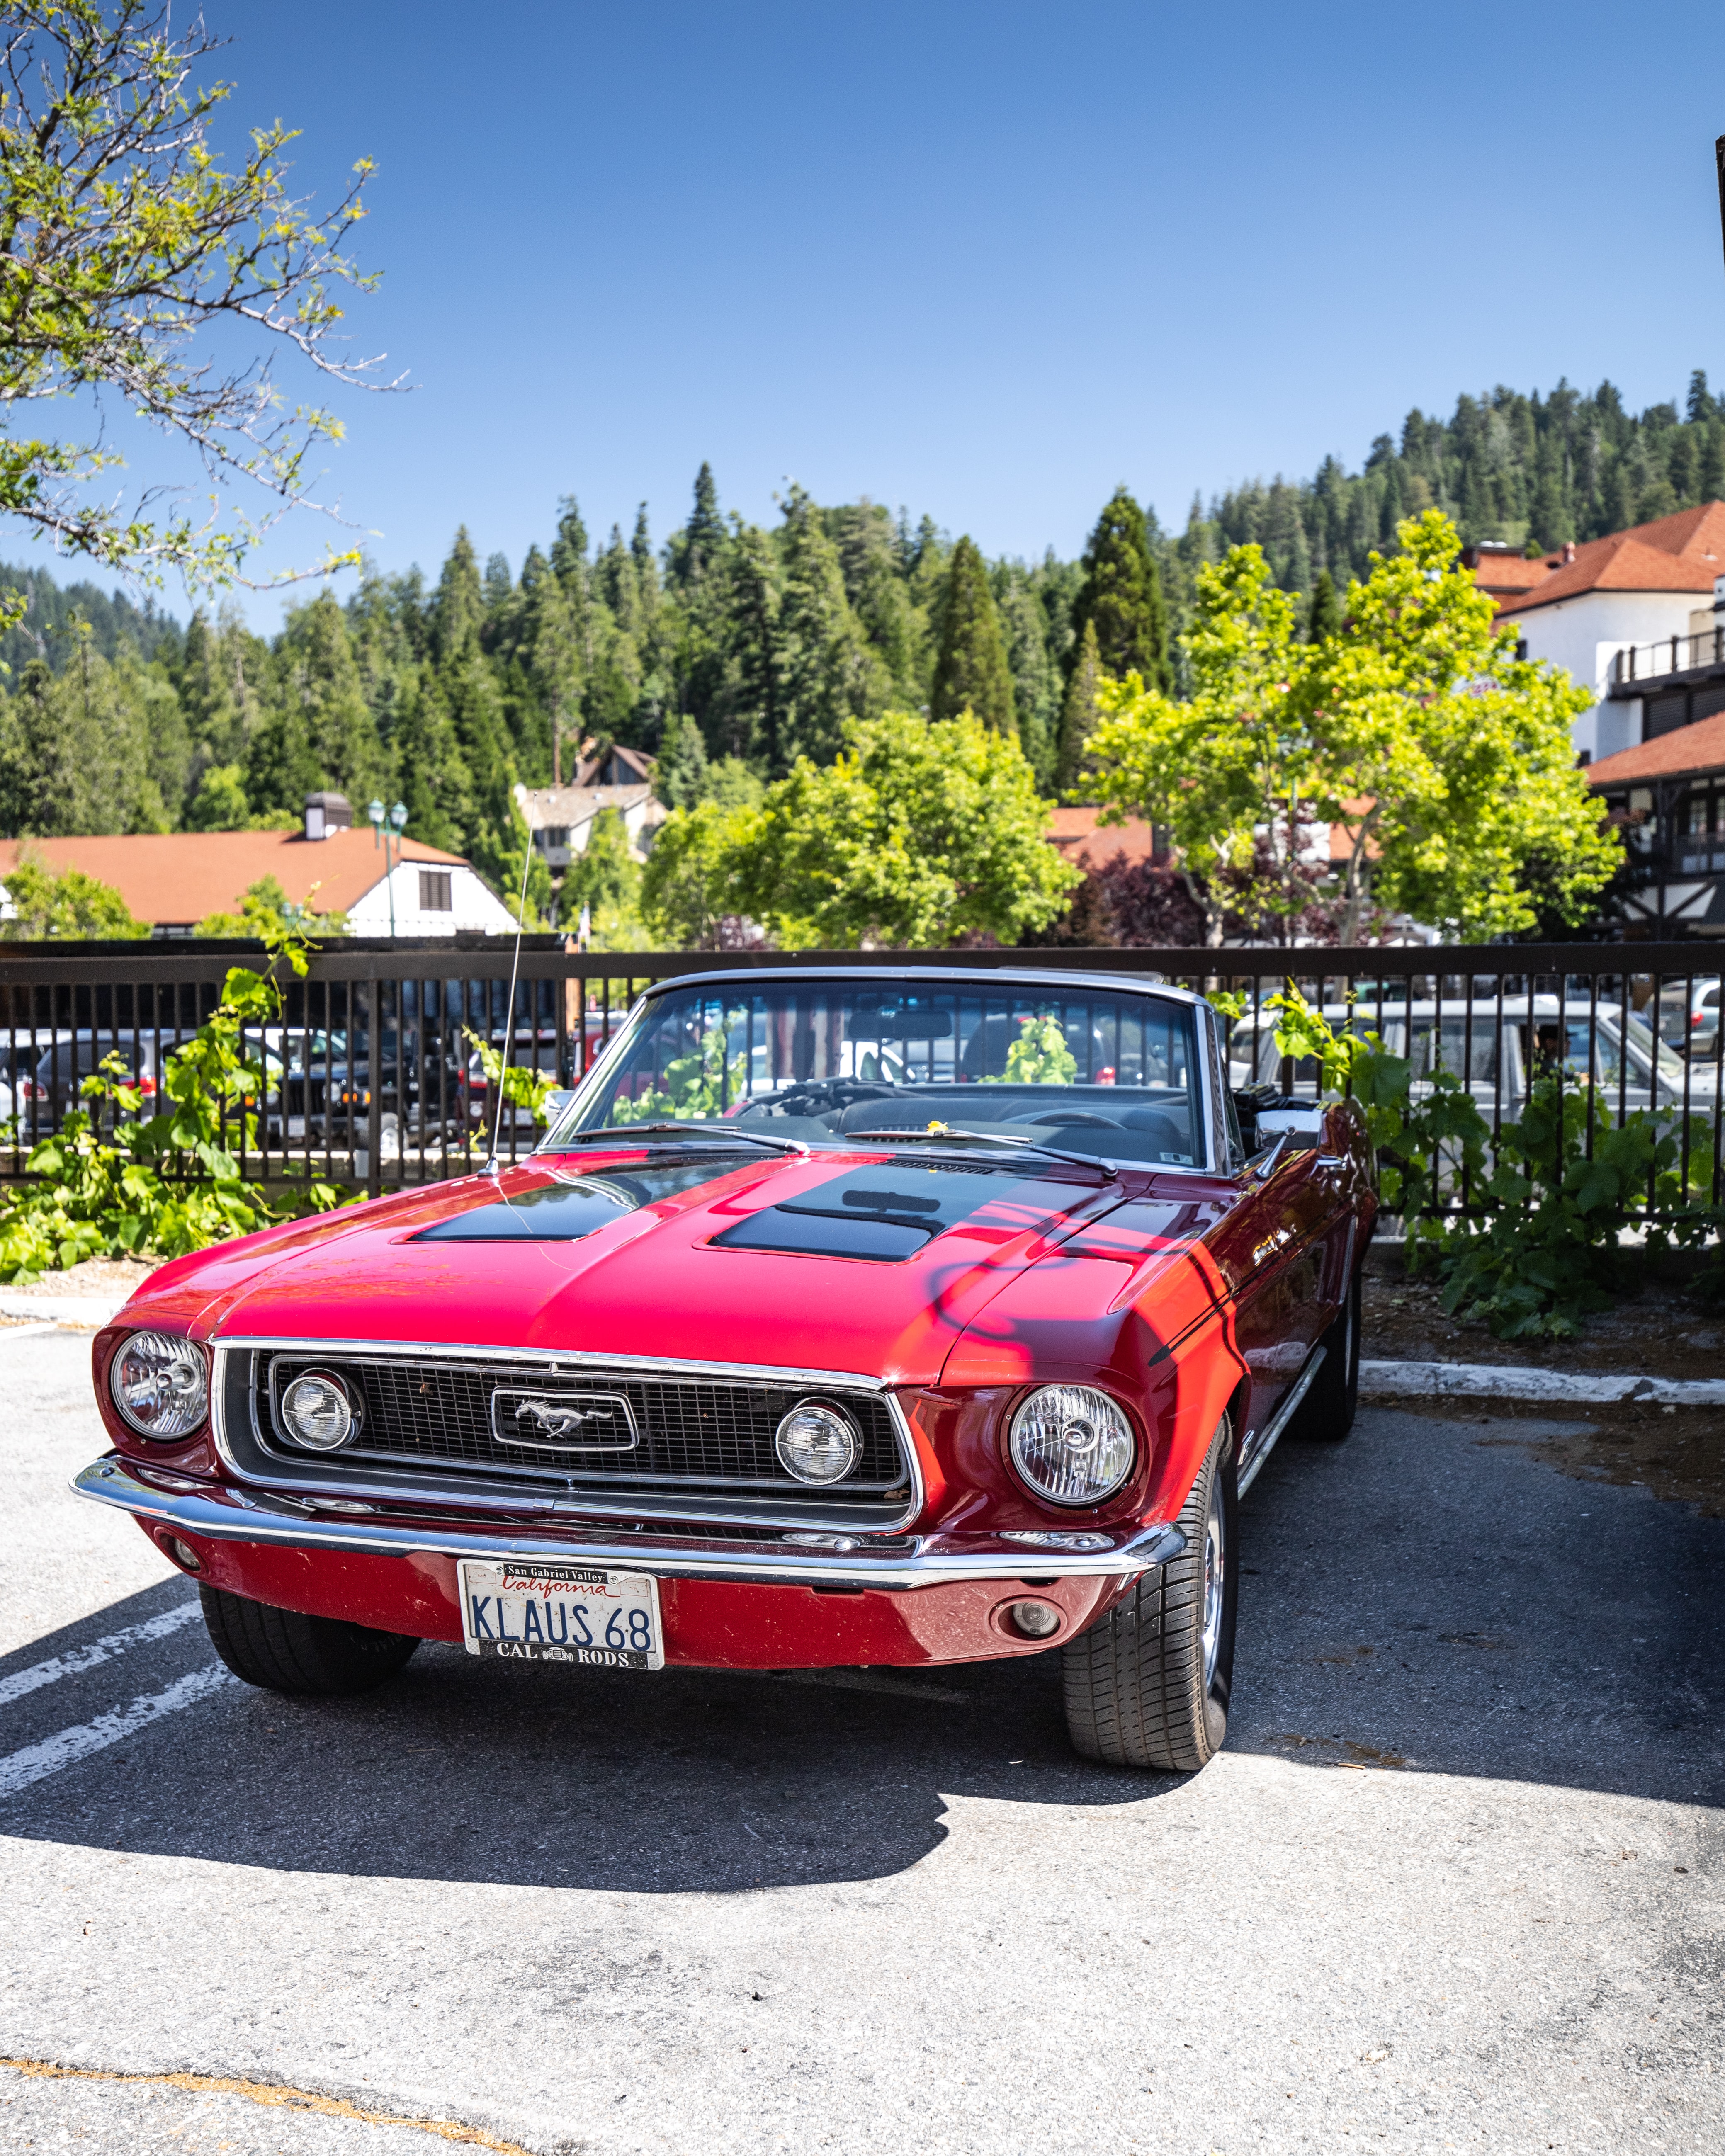 mustang, cars, lights, car, front view, headlights, retro images